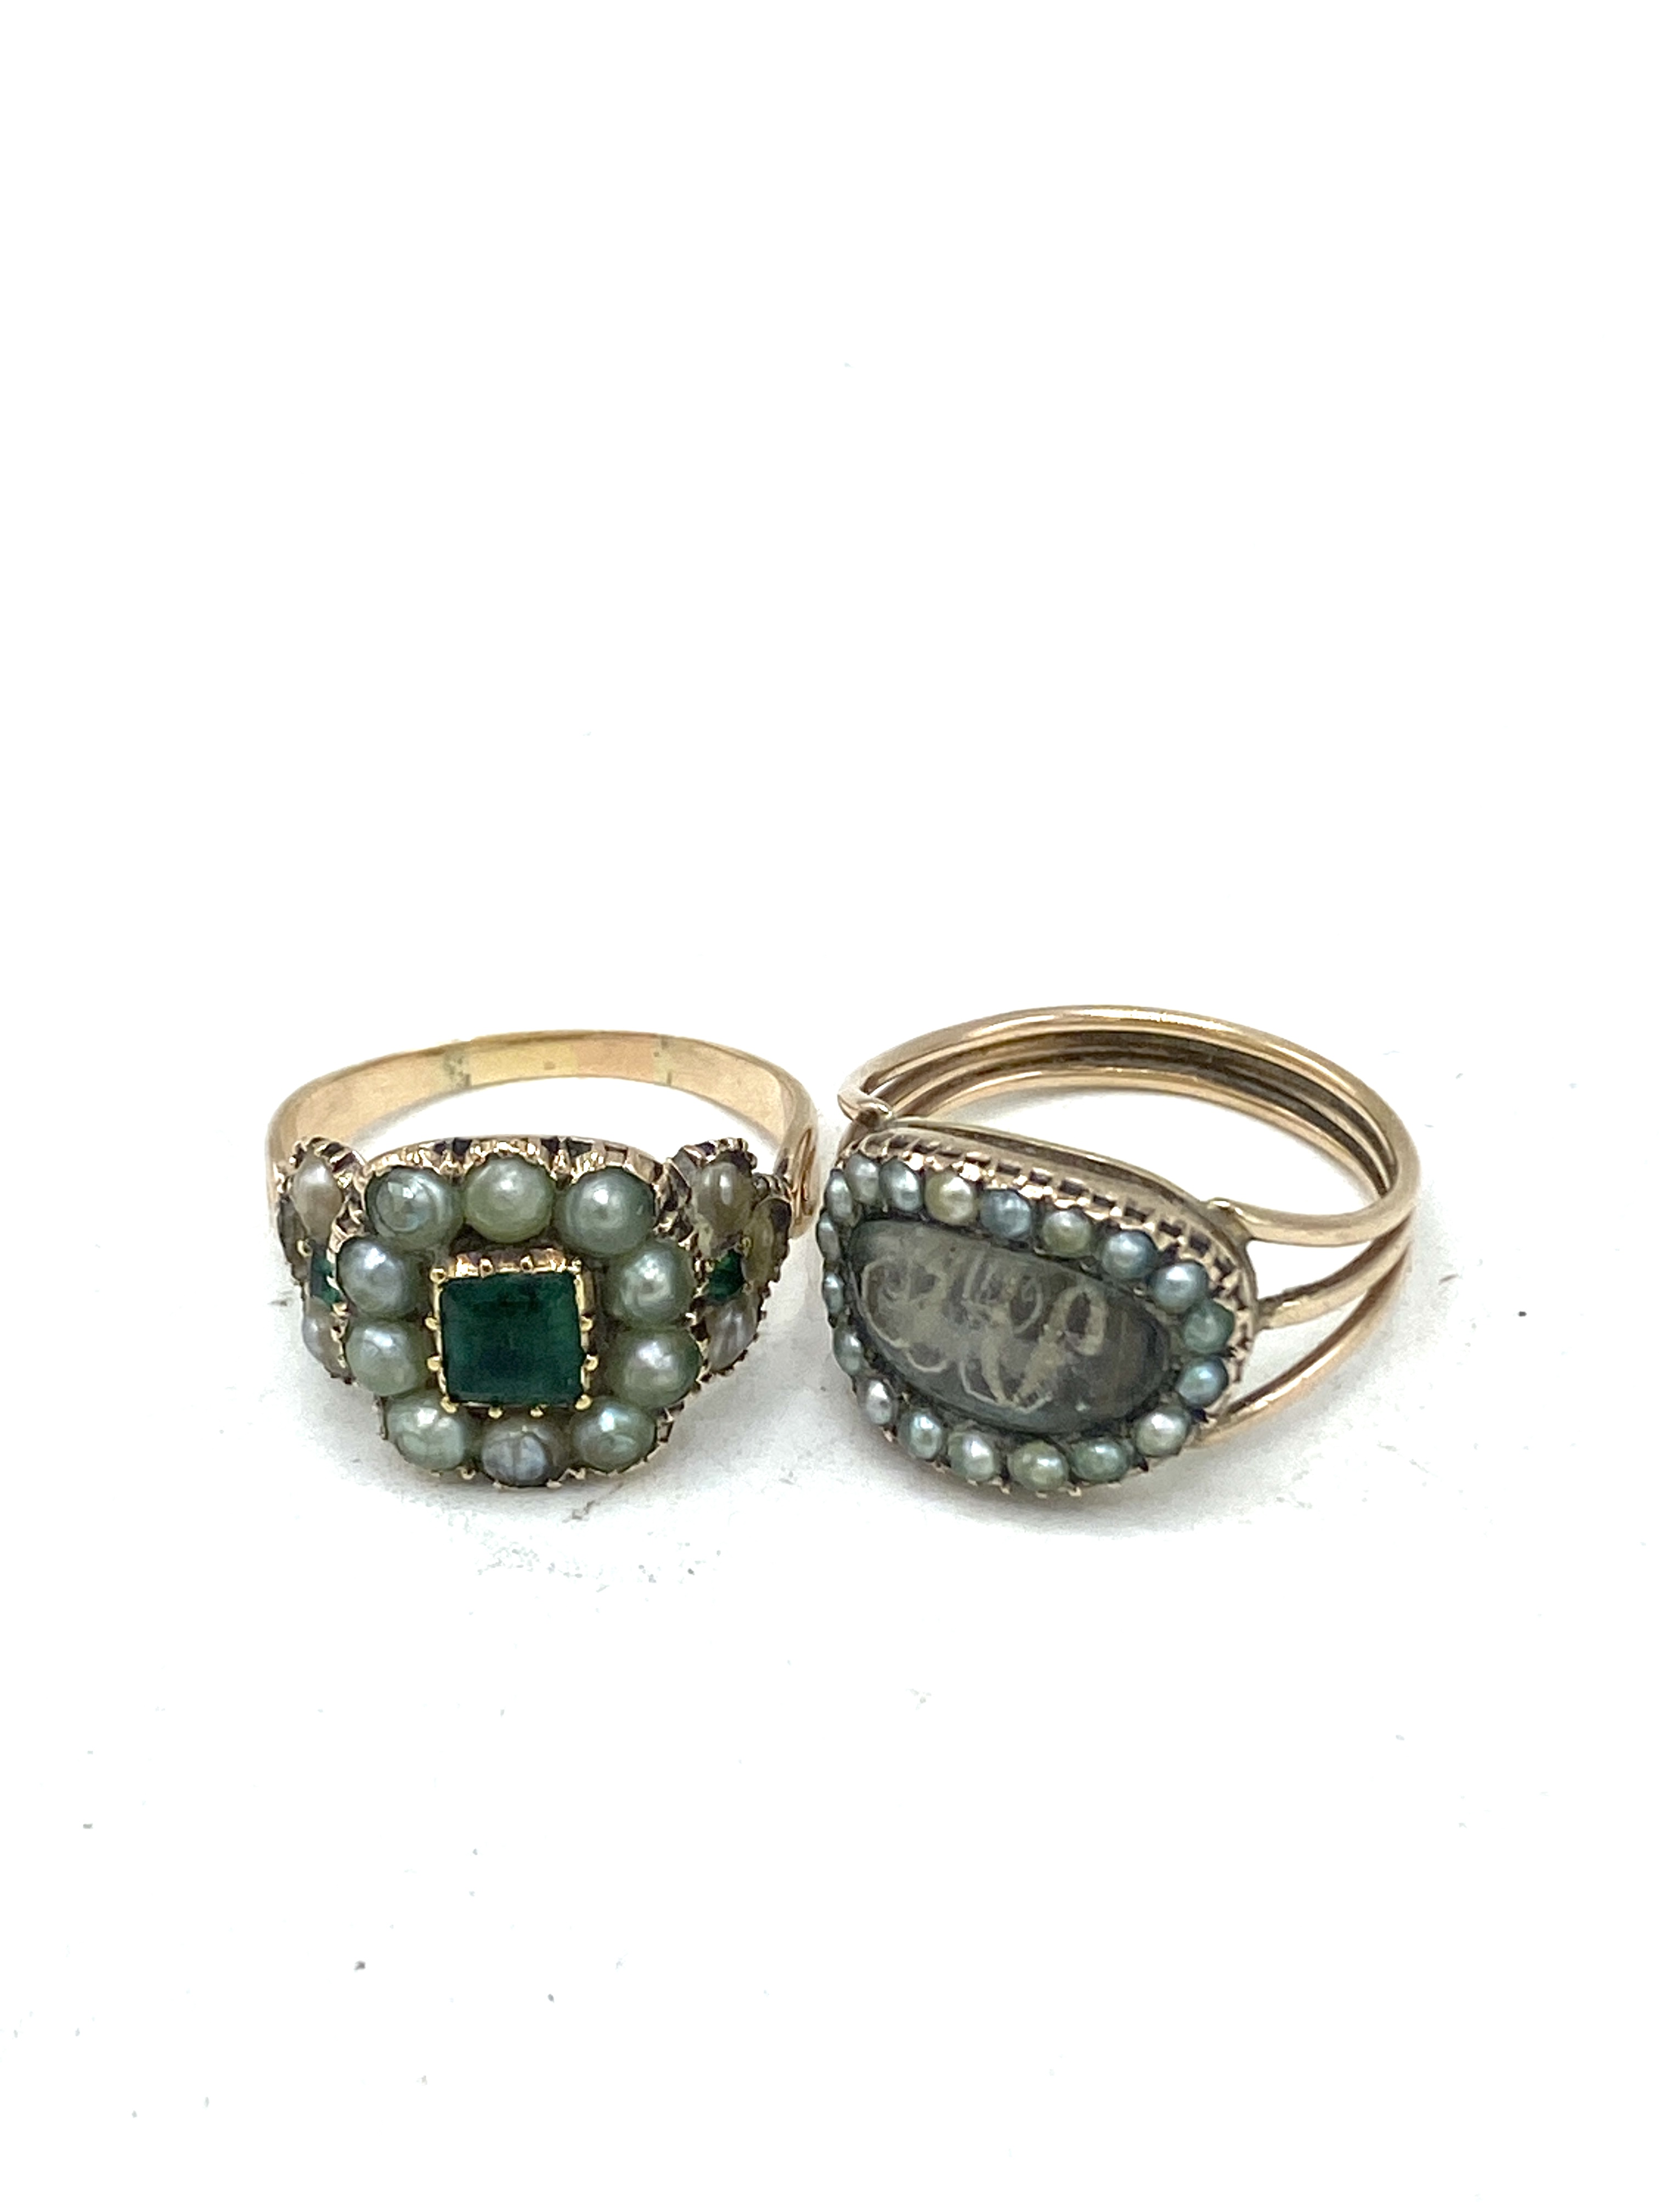 19th century emerald and pearl ring